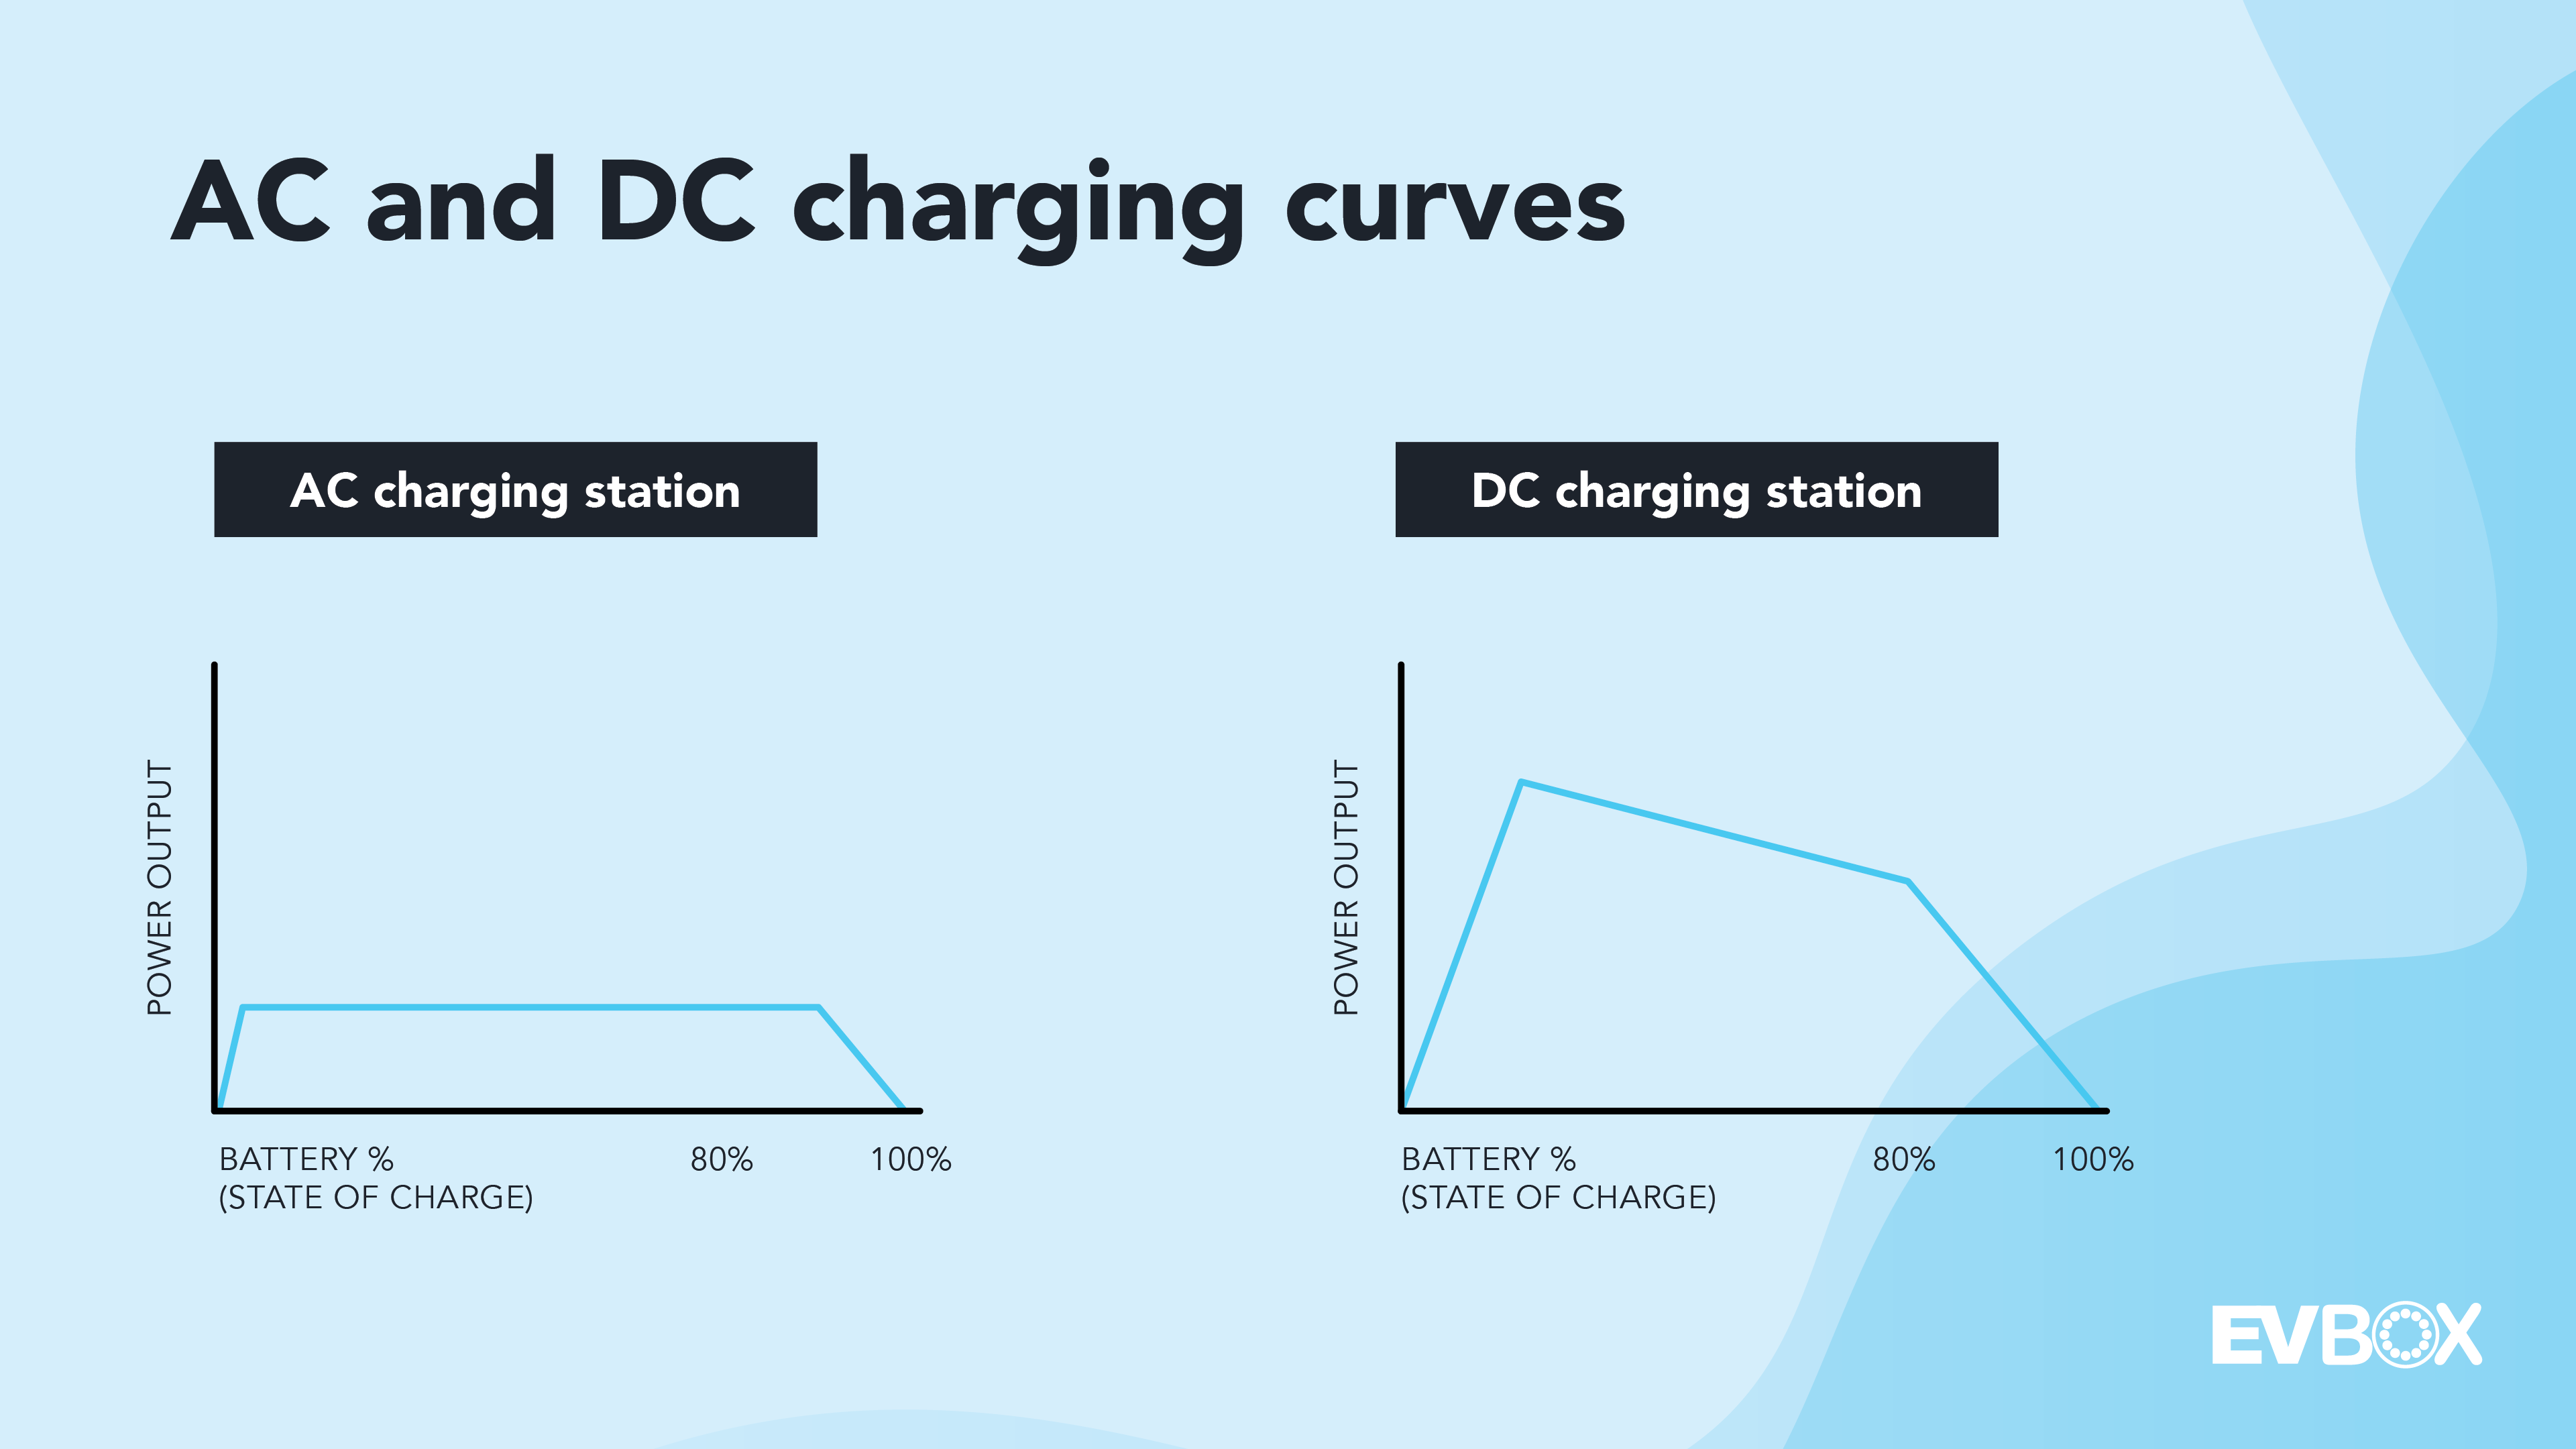 A graph showing the AC and DC charging curves.